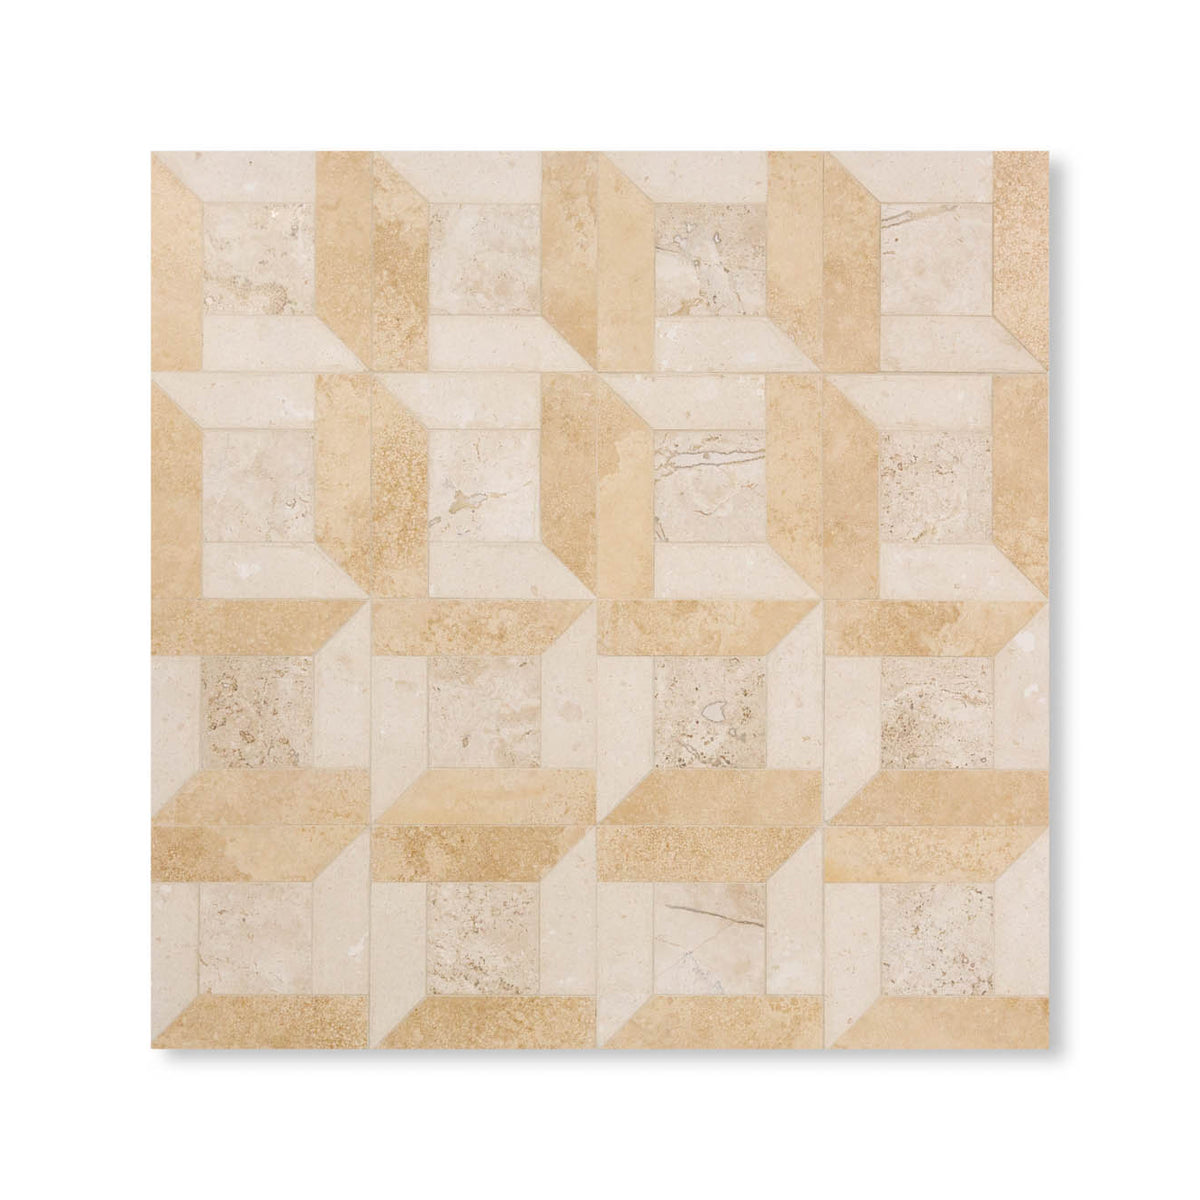 Shown in Seville Travertine with Dourdan and Pearl Marbles Main Product Slider View